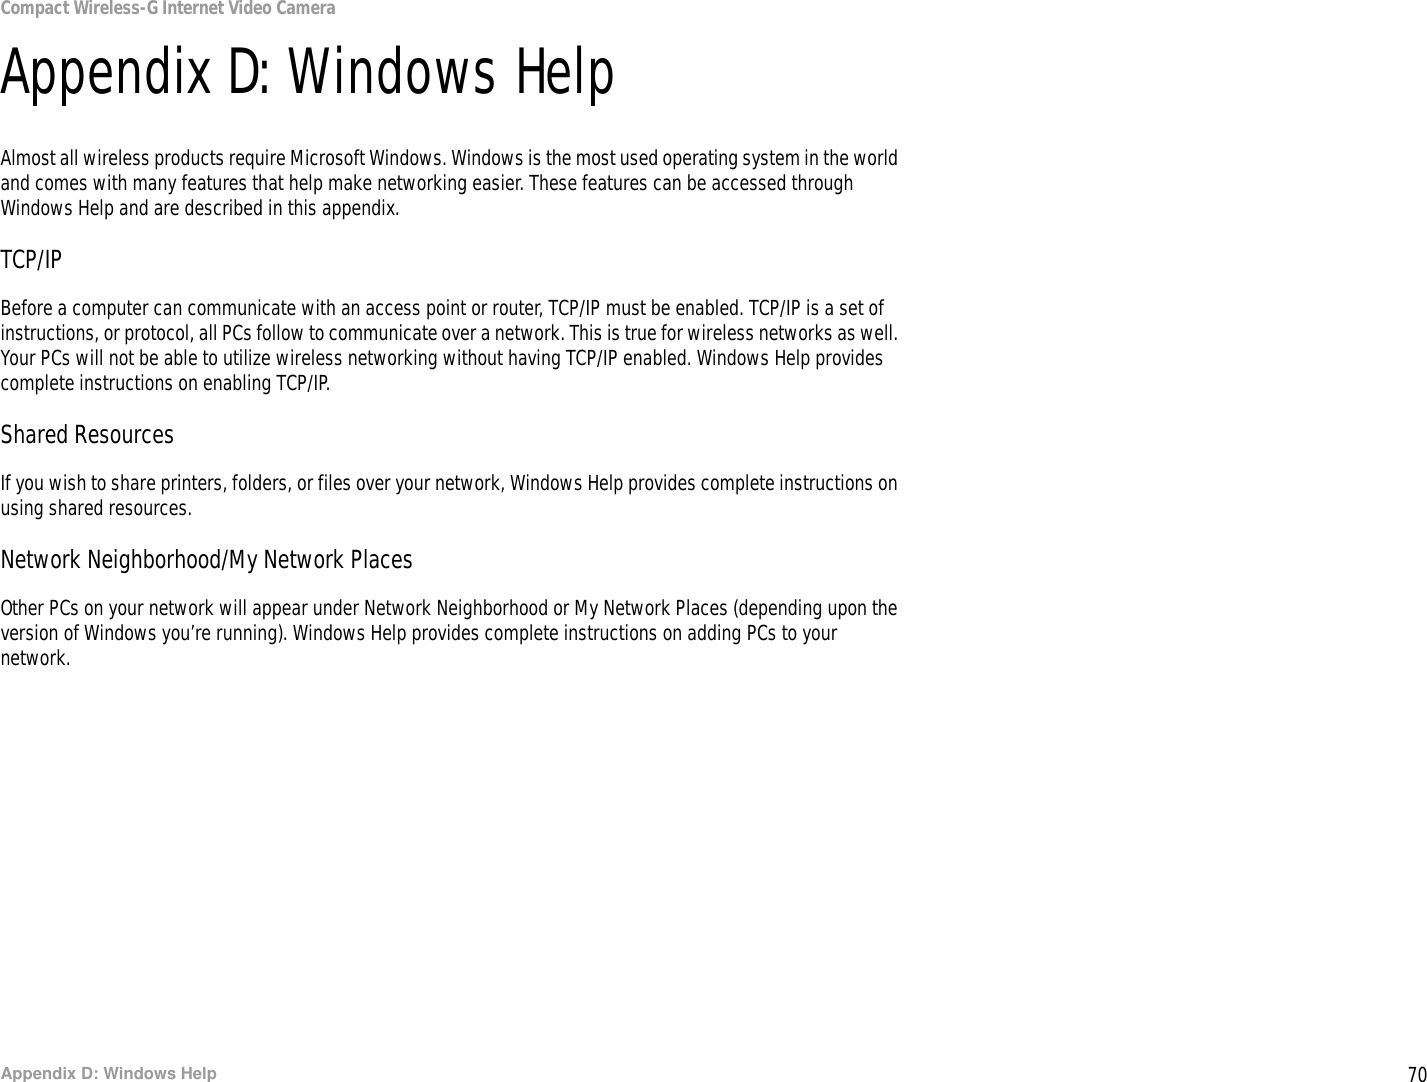 70Appendix D: Windows HelpCompact Wireless-G Internet Video CameraAppendix D: Windows HelpAlmost all wireless products require Microsoft Windows. Windows is the most used operating system in the world and comes with many features that help make networking easier. These features can be accessed through Windows Help and are described in this appendix.TCP/IPBefore a computer can communicate with an access point or router, TCP/IP must be enabled. TCP/IP is a set of instructions, or protocol, all PCs follow to communicate over a network. This is true for wireless networks as well. Your PCs will not be able to utilize wireless networking without having TCP/IP enabled. Windows Help provides complete instructions on enabling TCP/IP.Shared ResourcesIf you wish to share printers, folders, or files over your network, Windows Help provides complete instructions on using shared resources.Network Neighborhood/My Network PlacesOther PCs on your network will appear under Network Neighborhood or My Network Places (depending upon the version of Windows you’re running). Windows Help provides complete instructions on adding PCs to your network.